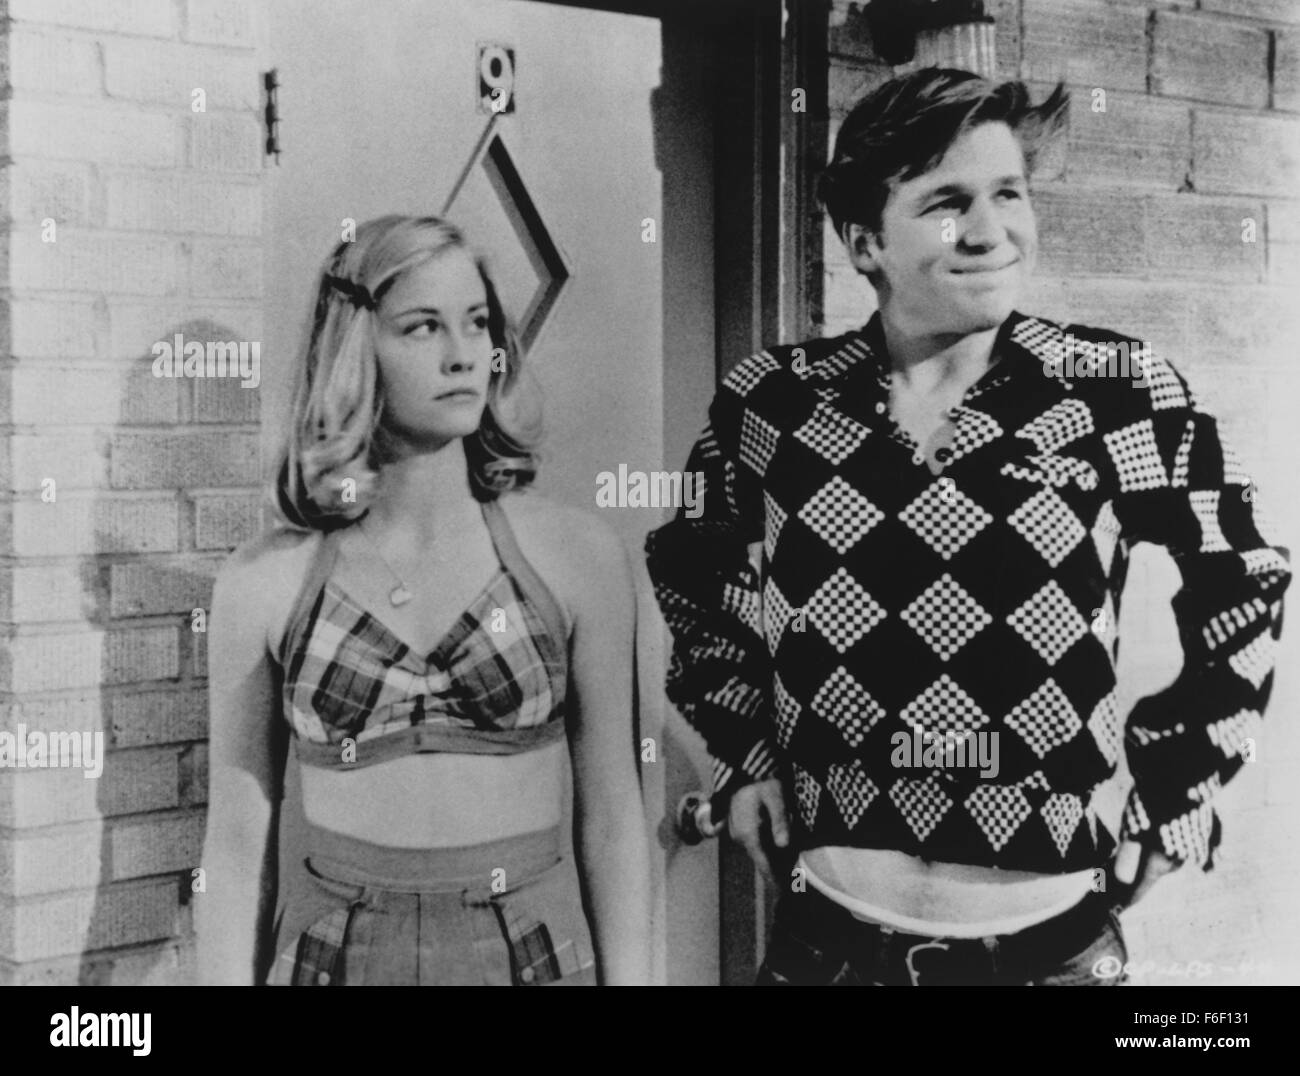 Oct 03, 1971; Archer City, TX, USA; From director Peter Bogdanovich and Columbia Pictures comes, 'The Last Picture Show,' a the story of three teenagers growing up in a small town in Texas during the 50's and the life choices they must make. Pictured is CYBILL SHEPHERD as Jacy Farrow and JEFF BRIDGES as Duane Jackson. Stock Photo